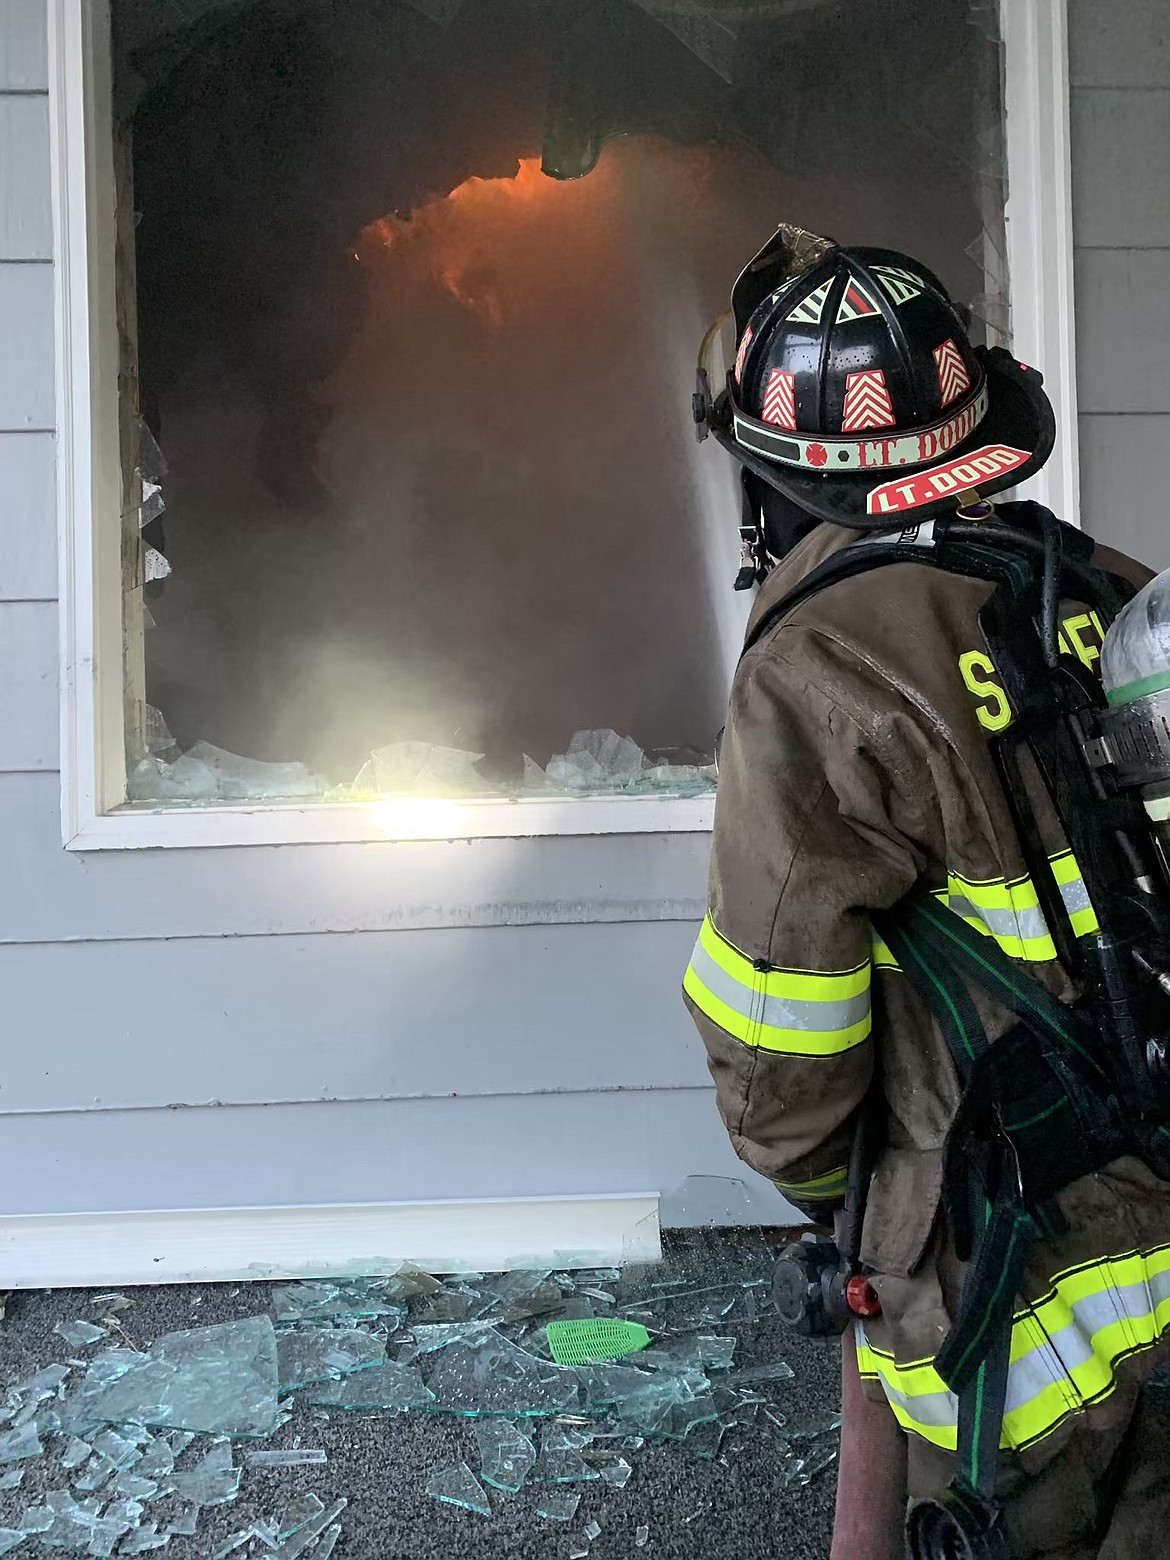 AN EMERGENCY responder works to extinguish the flames at the Hilltop Motel in Superior on Saturday, May 11. (Courtesy photo)